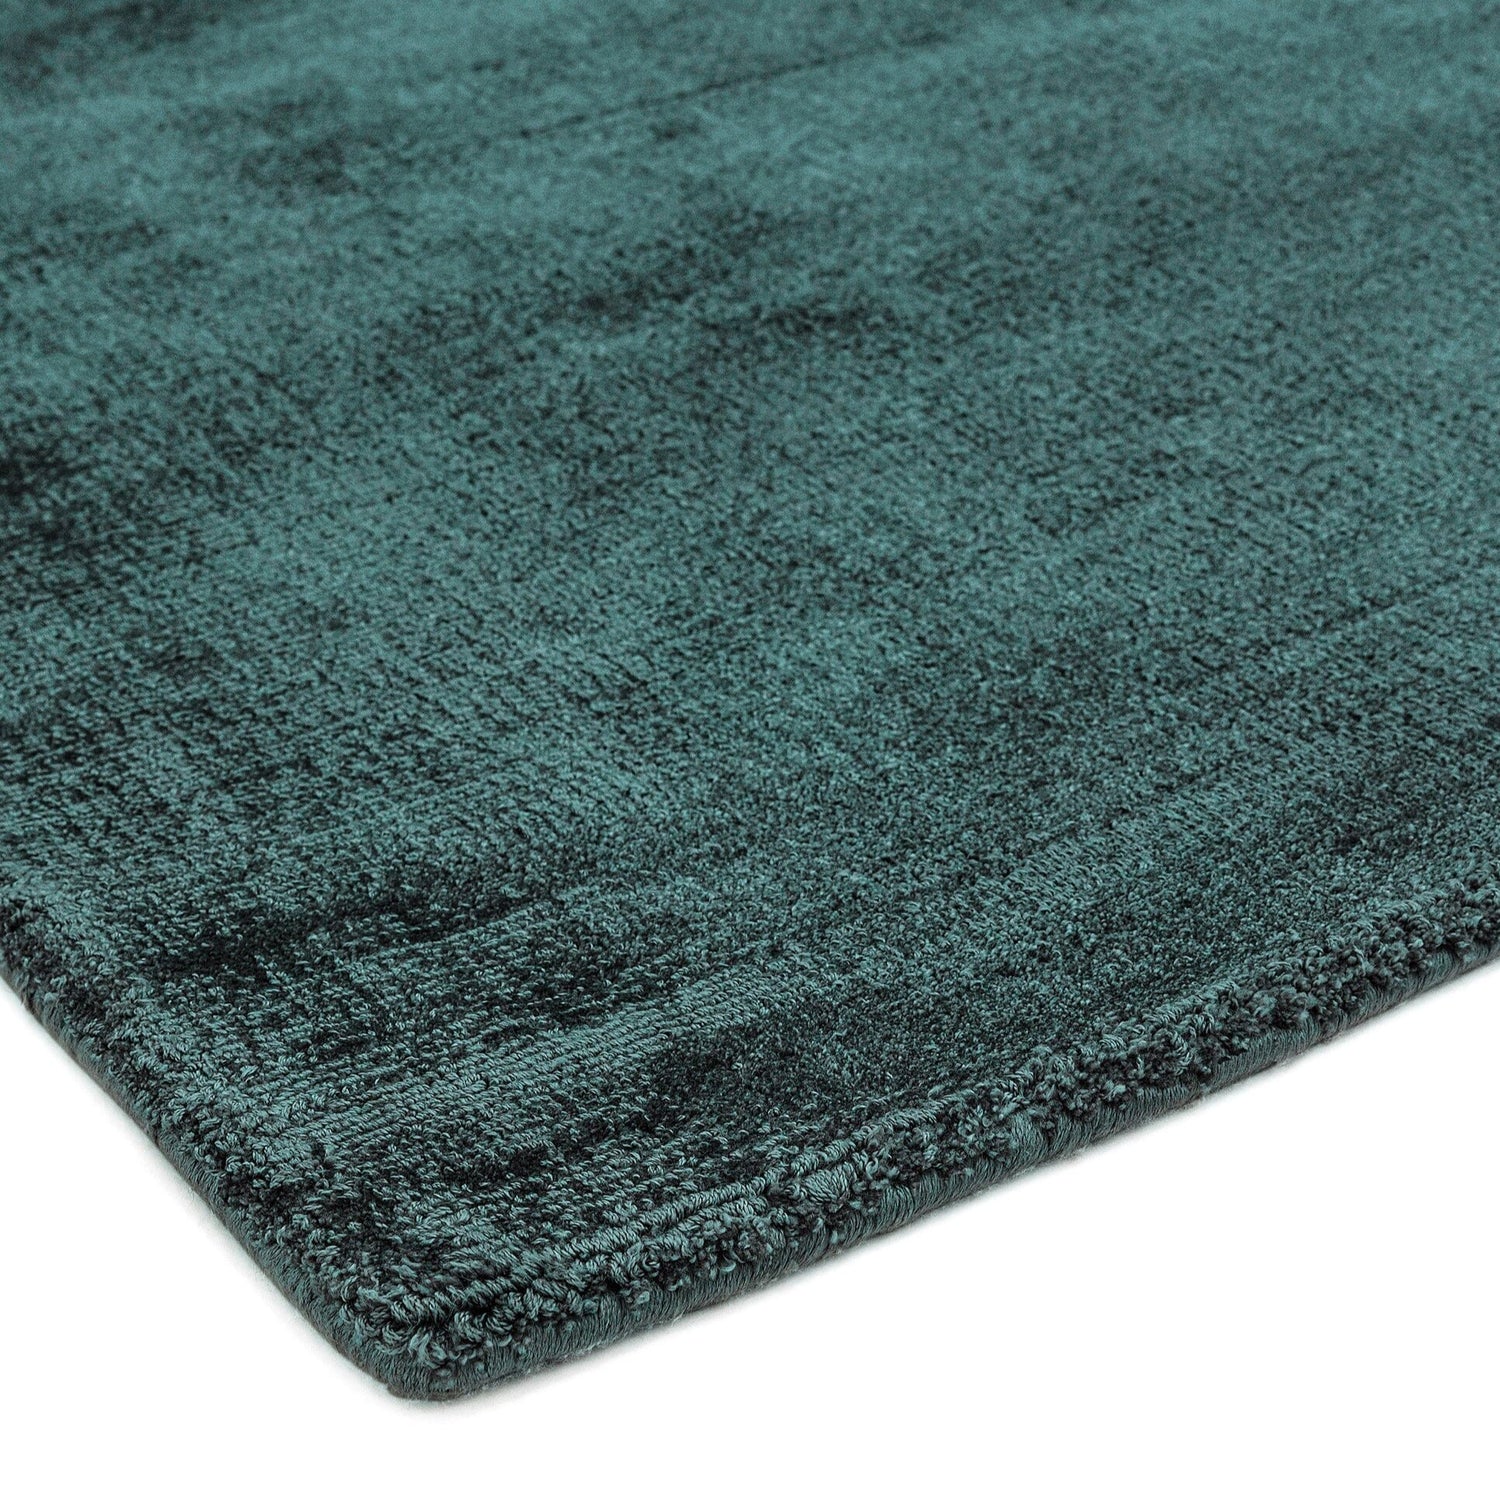  Asiatic Carpets-Asiatic Carpets Blade Hand Woven Rug Teal - 120 x 170cm-Green 629 